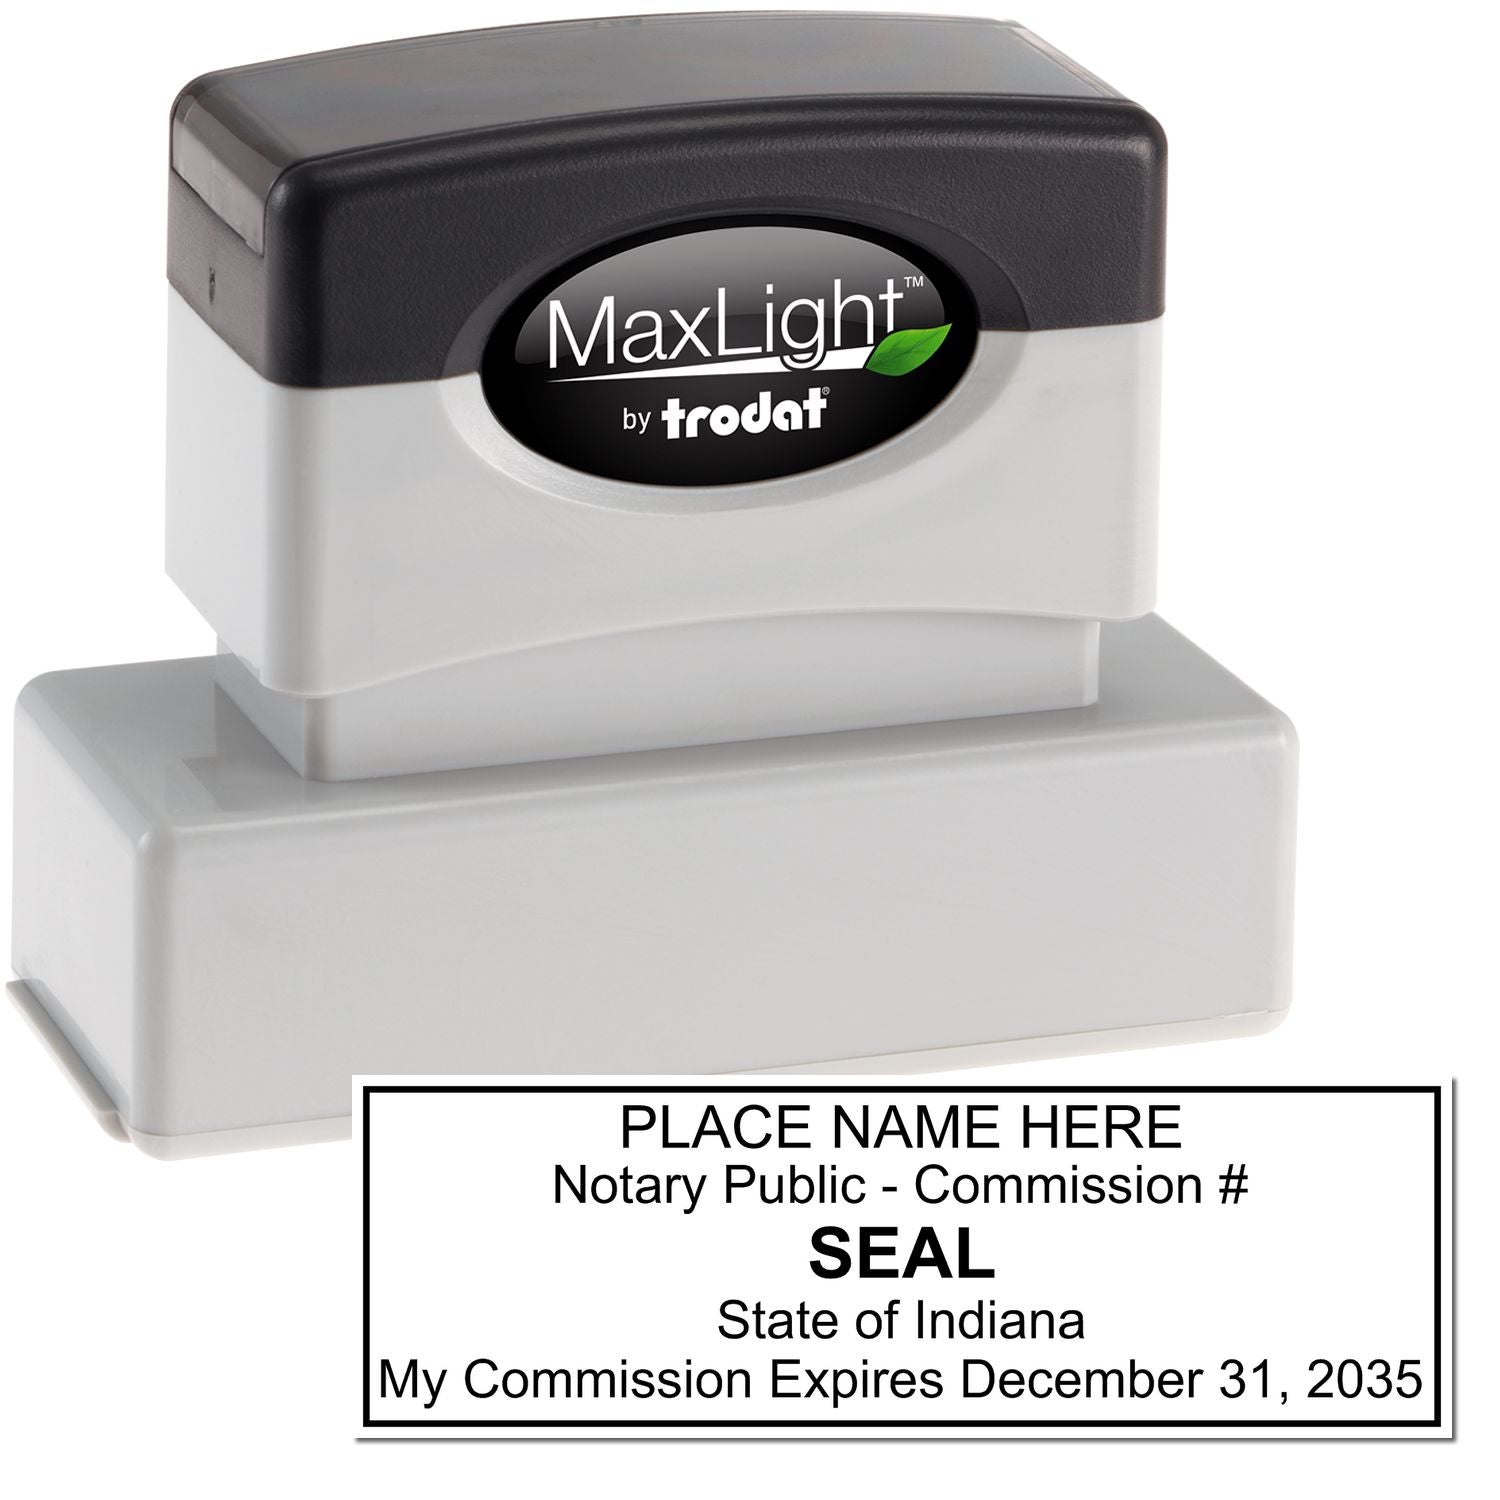 The main image for the MaxLight Premium Pre-Inked Indiana Rectangular Notarial Stamp depicting a sample of the imprint and electronic files